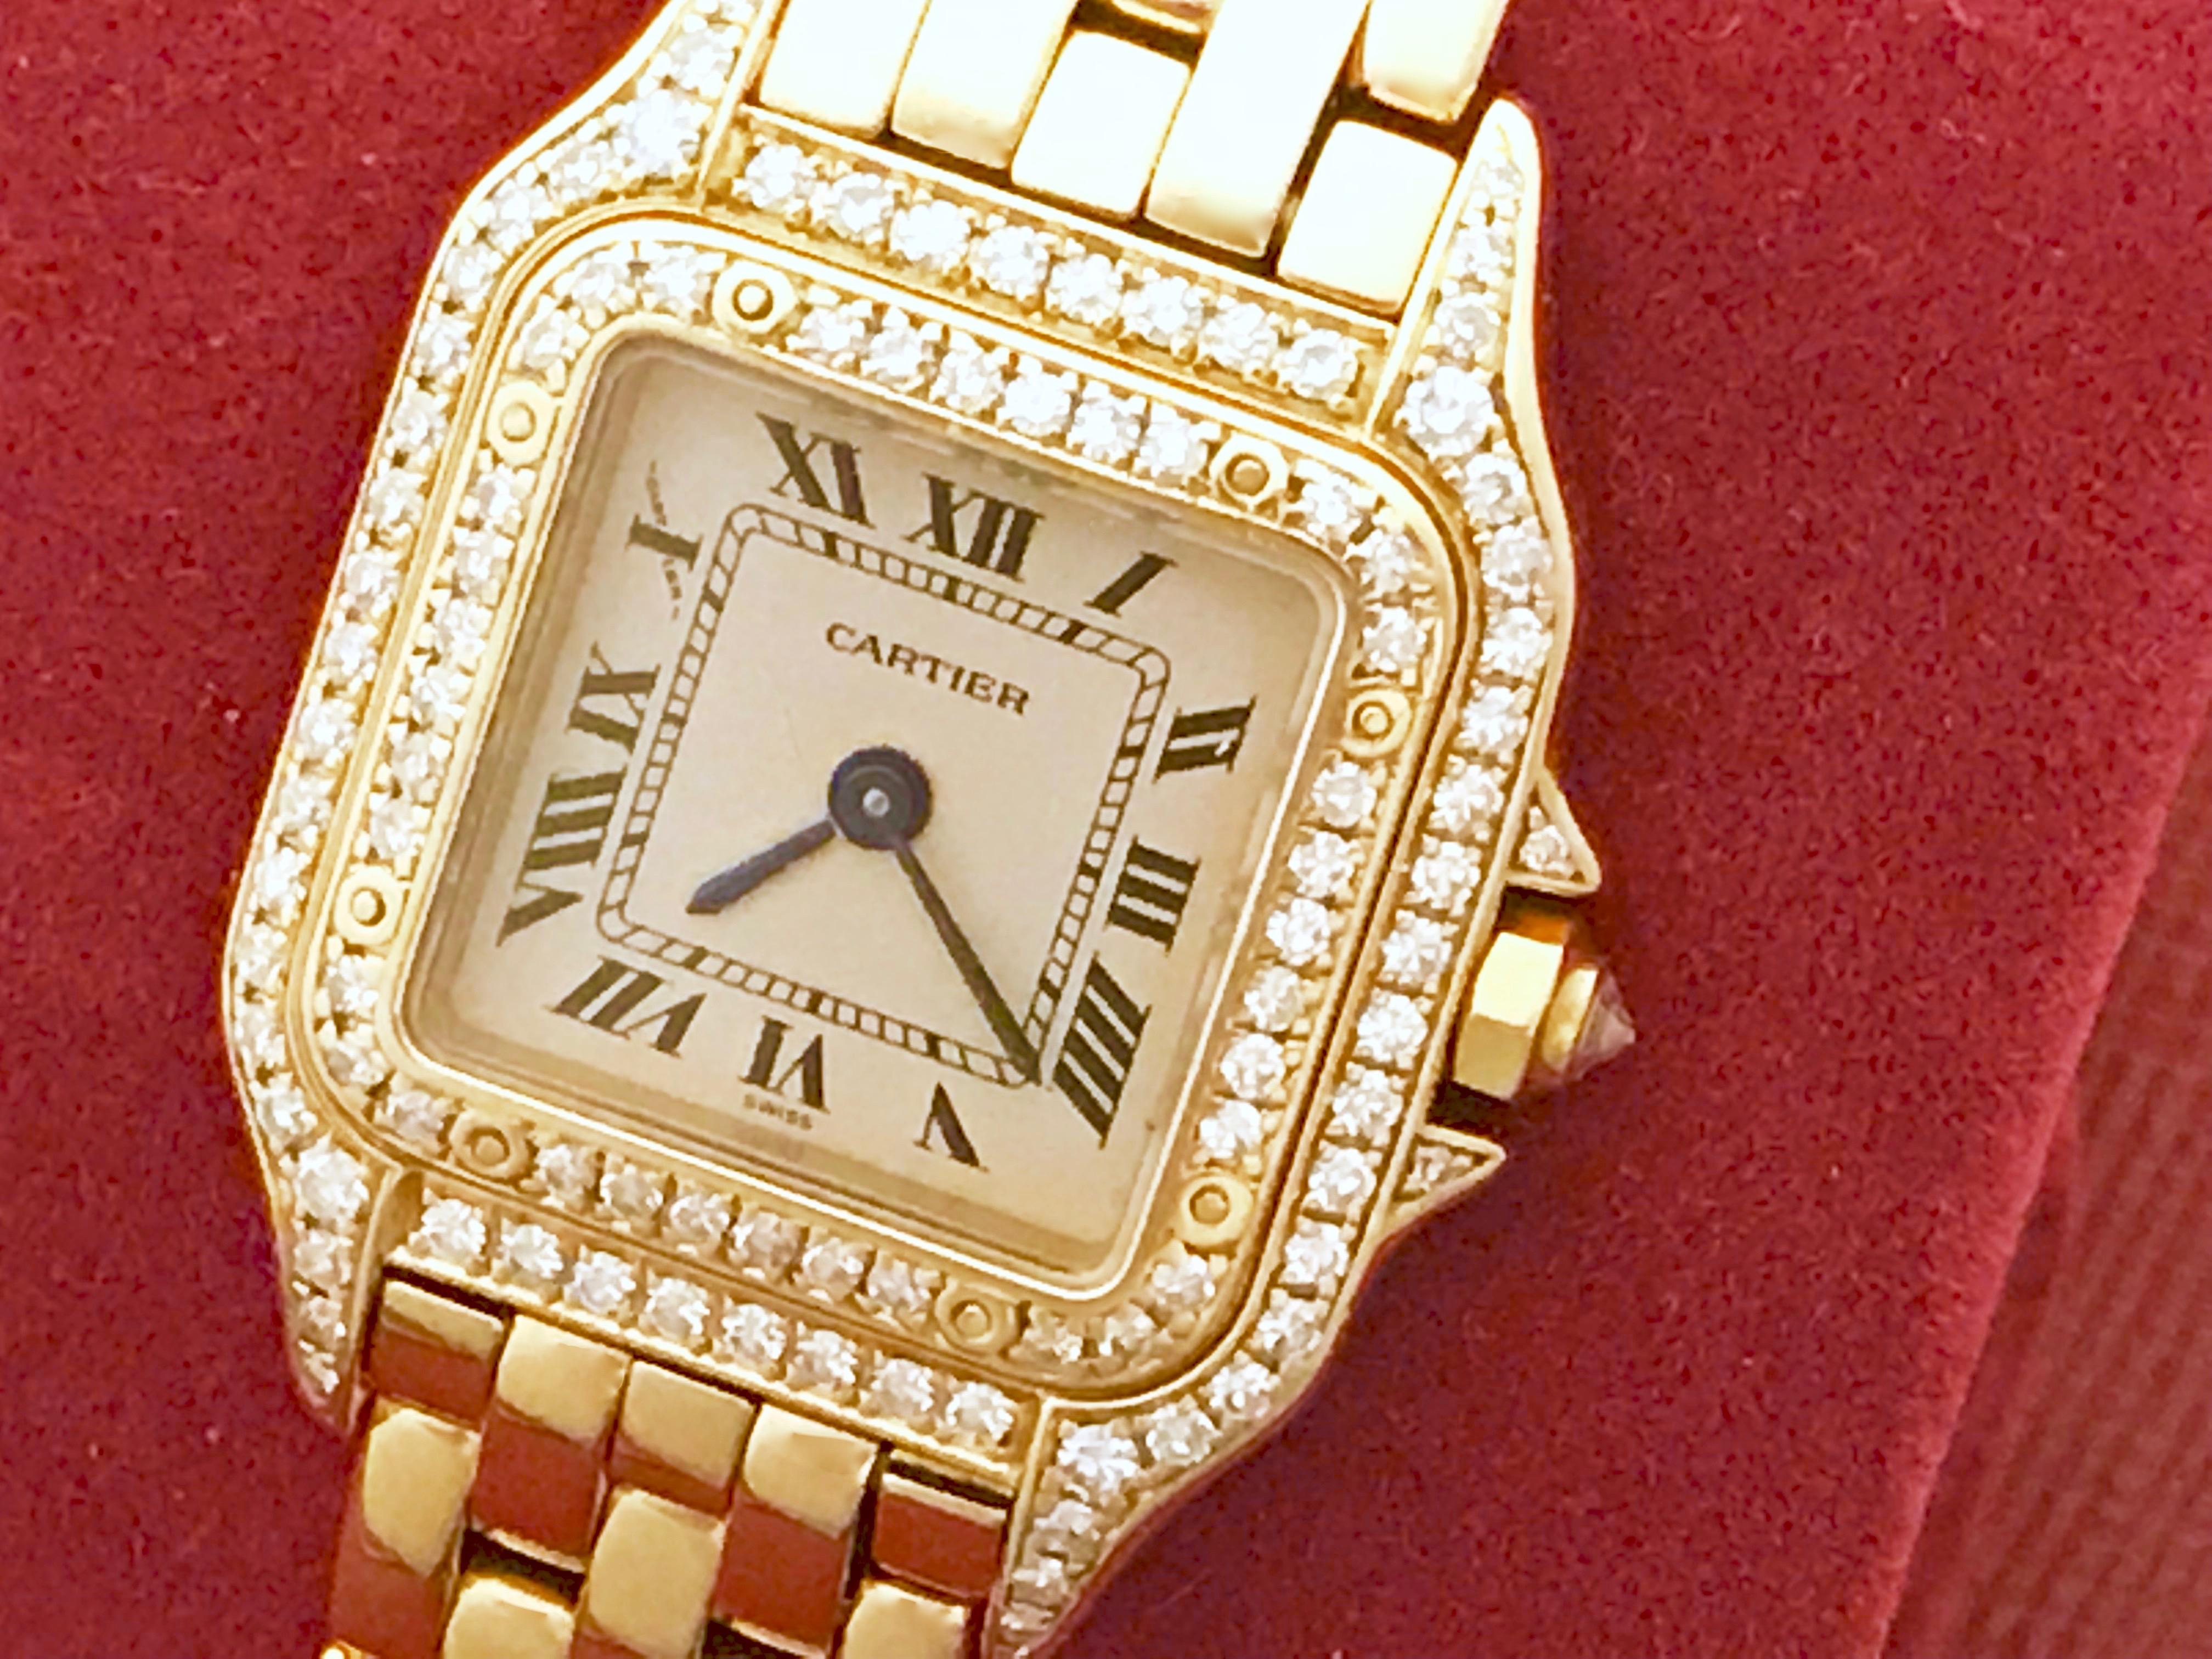 Cartier Ladies Panther 18K Yellow Gold ladies diamond wrist watch. As new, Certified pre-owned and ready to ship.  Quartz movement, 18k Yellow Gold square style Cartier Diamond case, Diamond bezel and Diamond cabochon setting crown (21x30mm).  18K